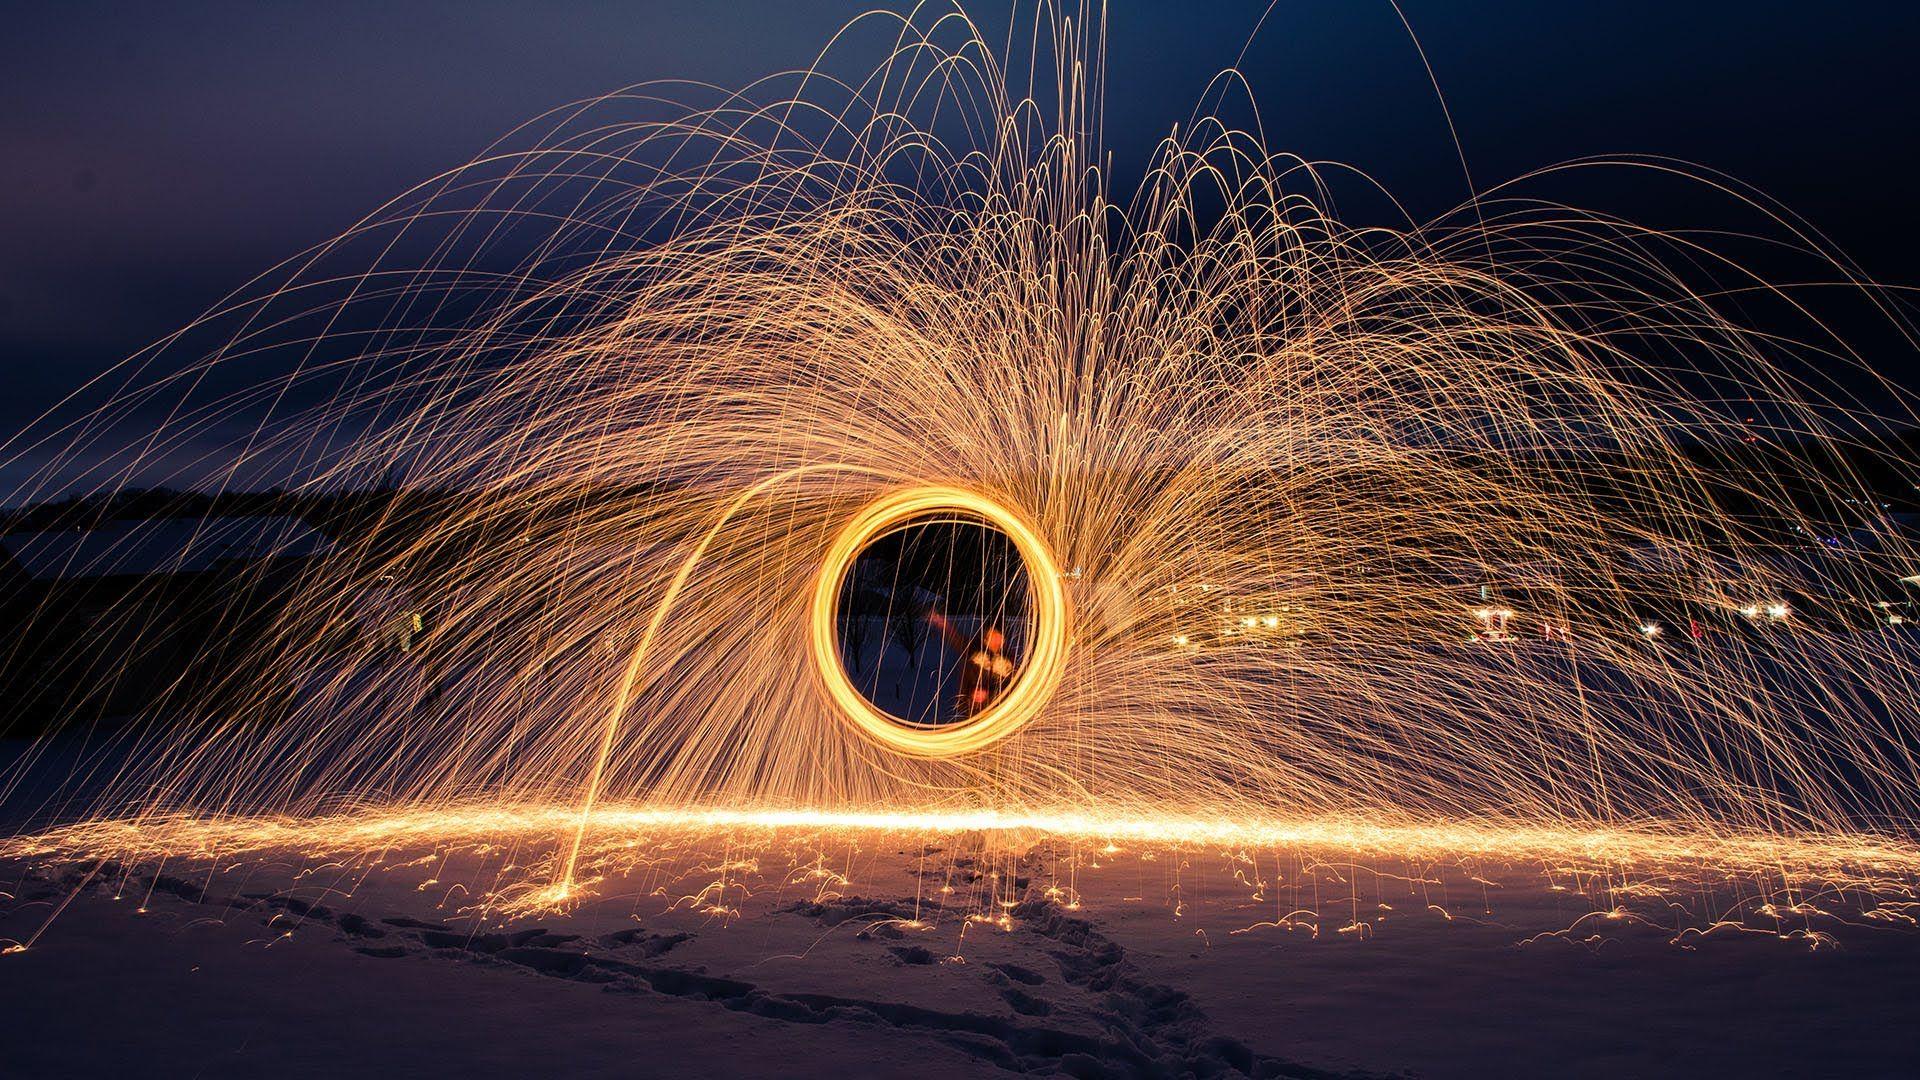 Alex explains and demonstrates the unique art of steel wool